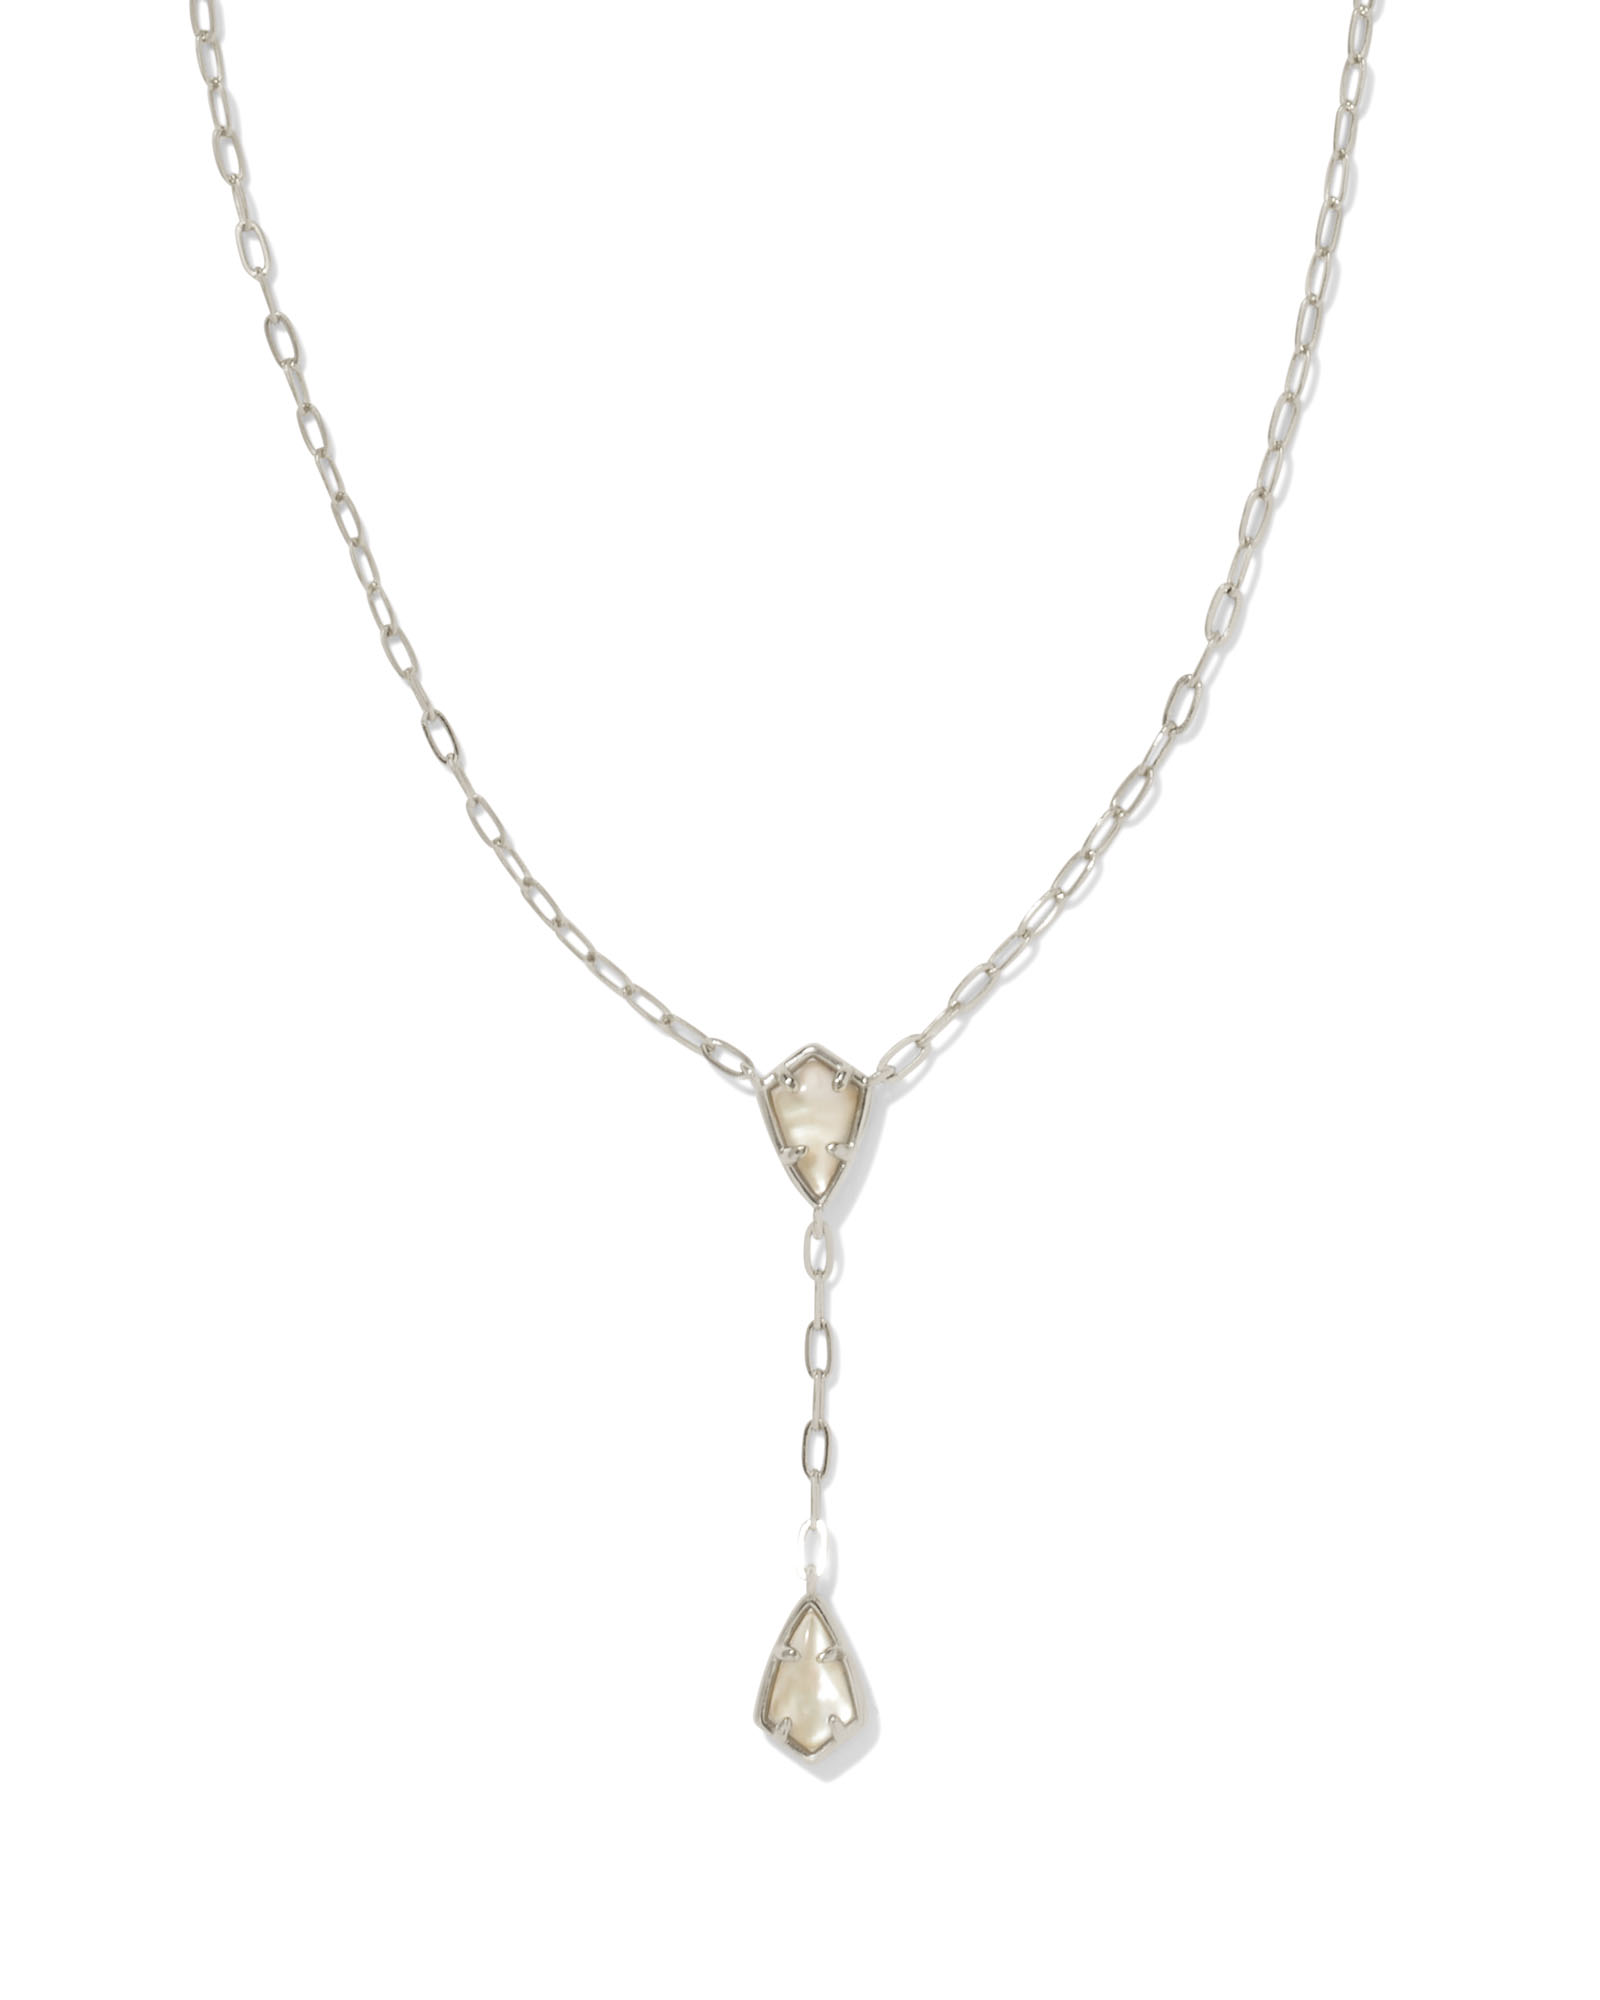 https://www.bsaftp.com/hellodiamonds.com/images/Kendra-Scott-Camry-Y-Necklace-Rhodium-Ivory-Mother-of-Pearl-00.jpeg